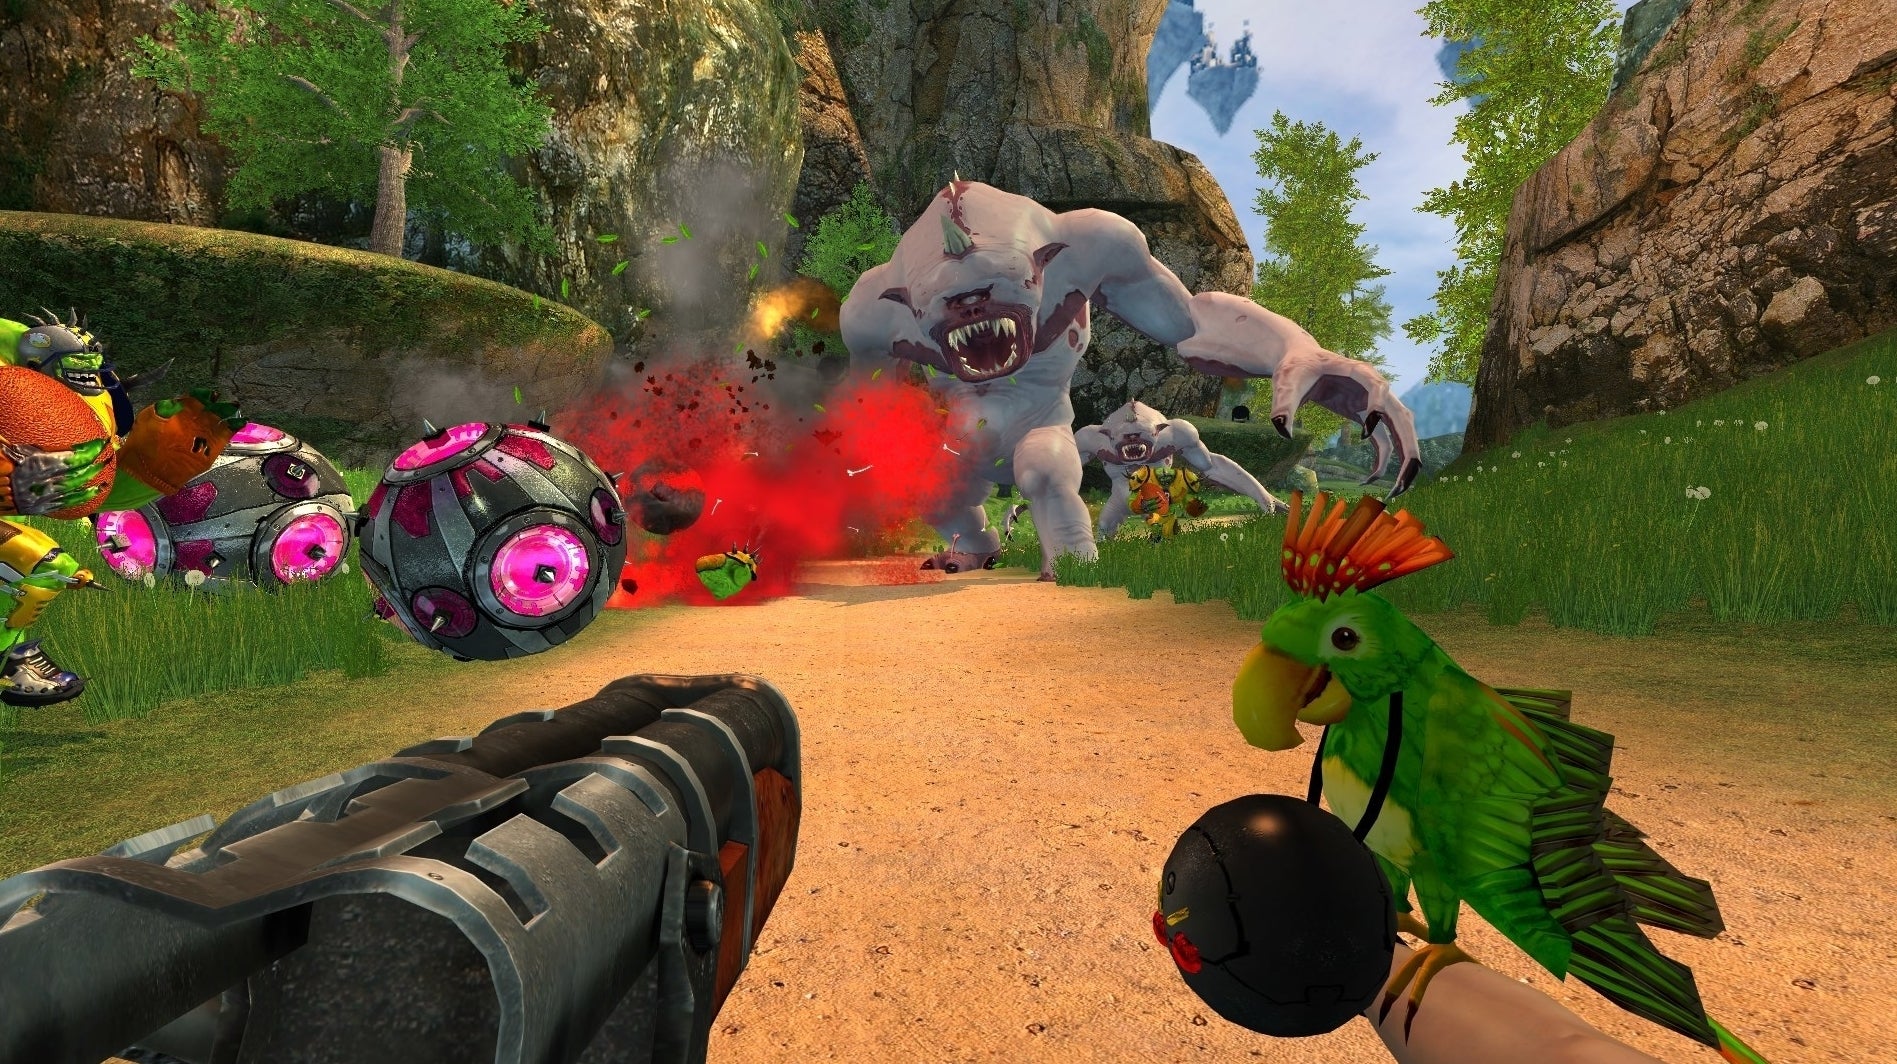 Image for Serious Sam 2 surprises fans with substantial new update, 15 years after original release